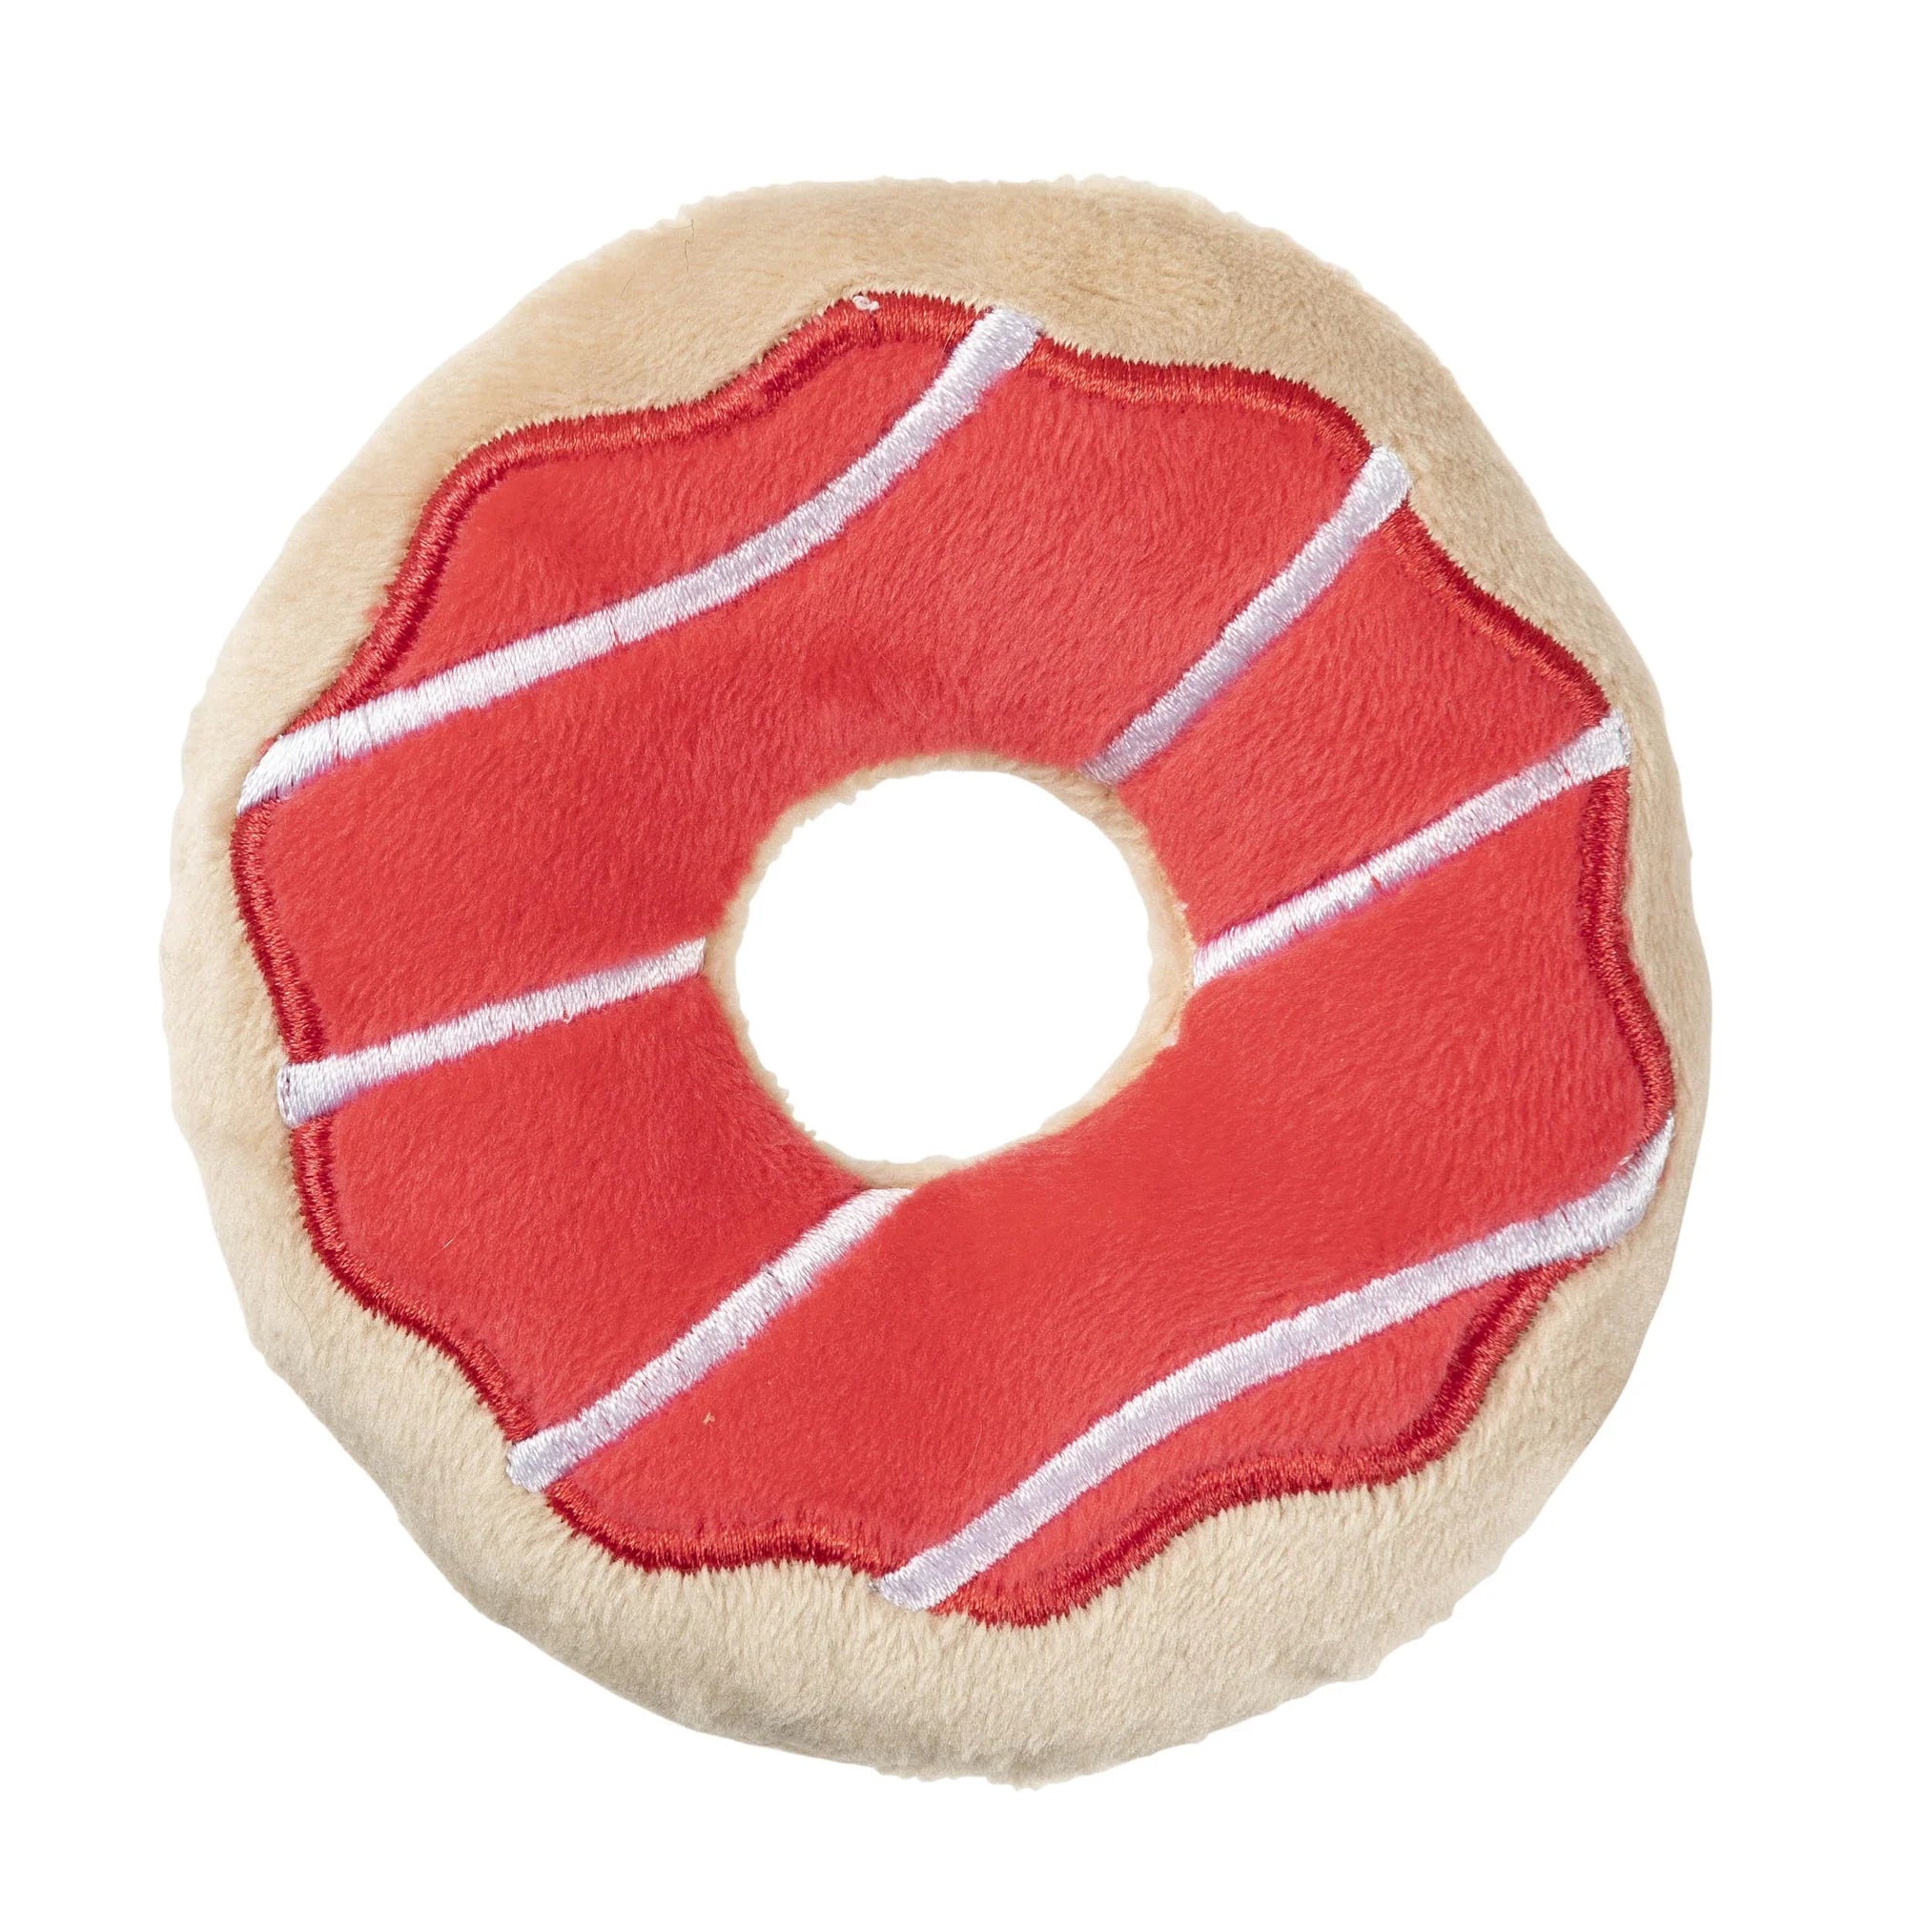 Gingerccino & Donuts 3PK Christmas Dog Toy